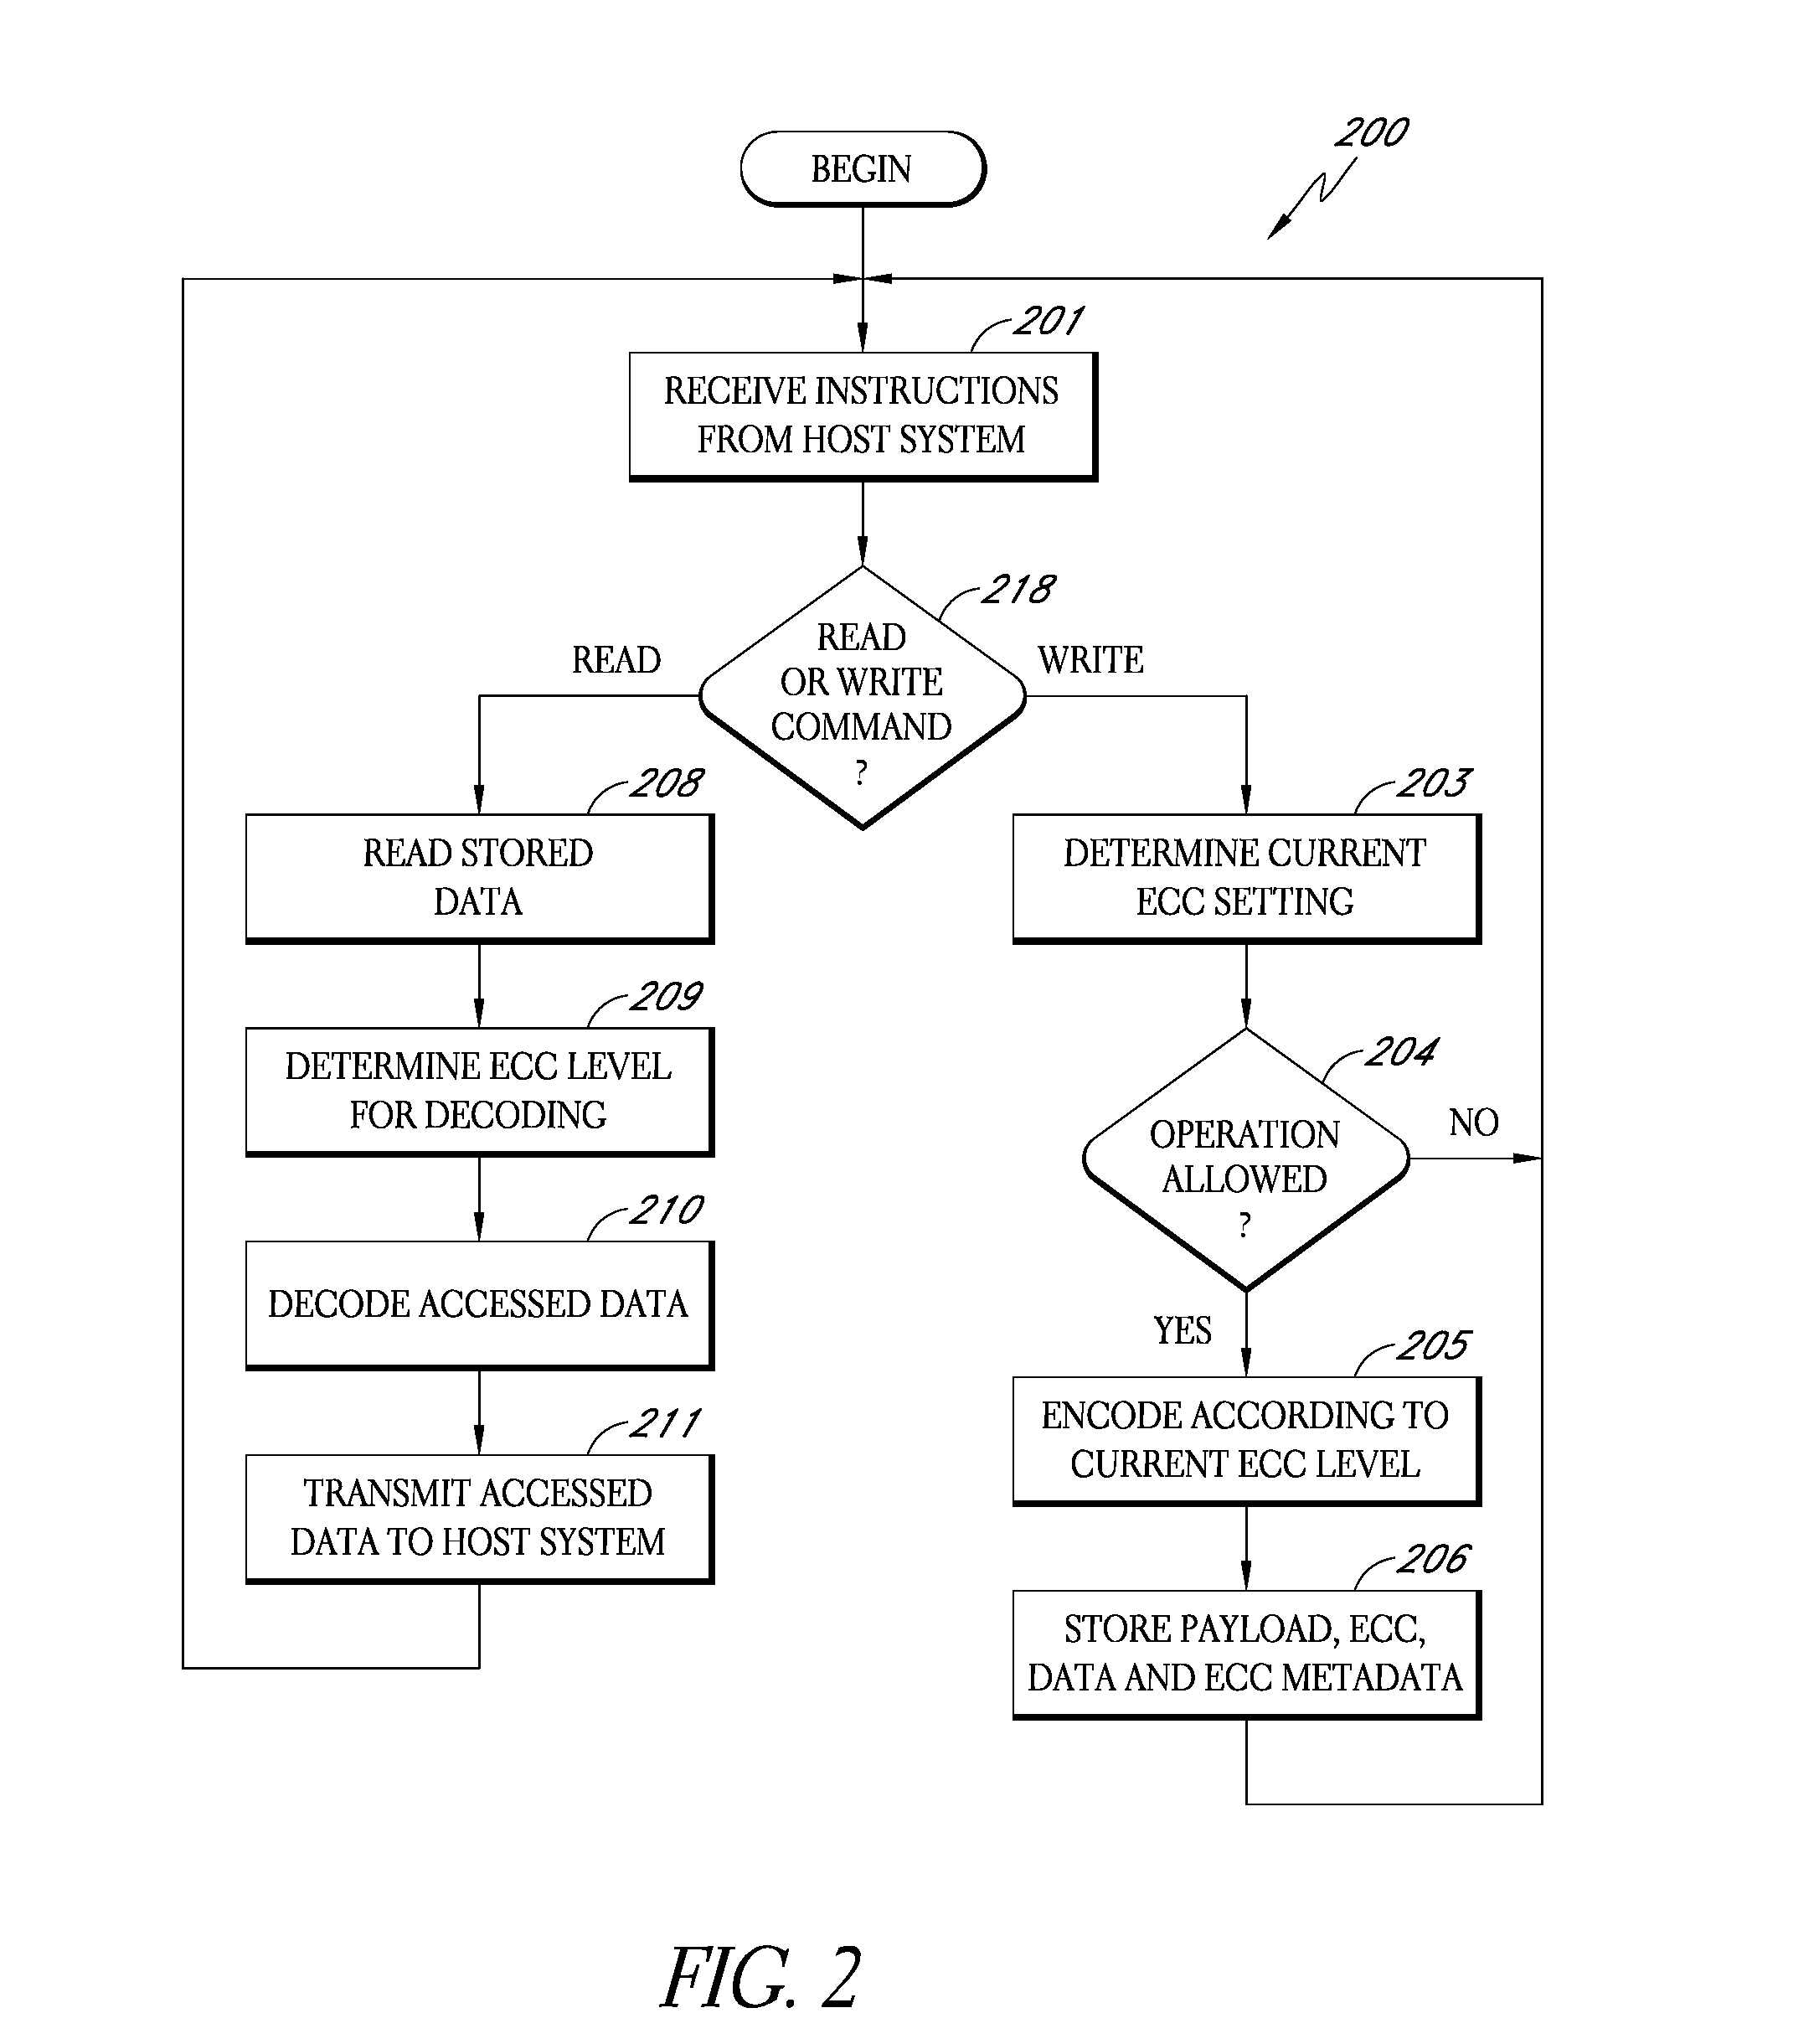 Storage subsystem capable of adjusting ecc settings based on monitored conditions